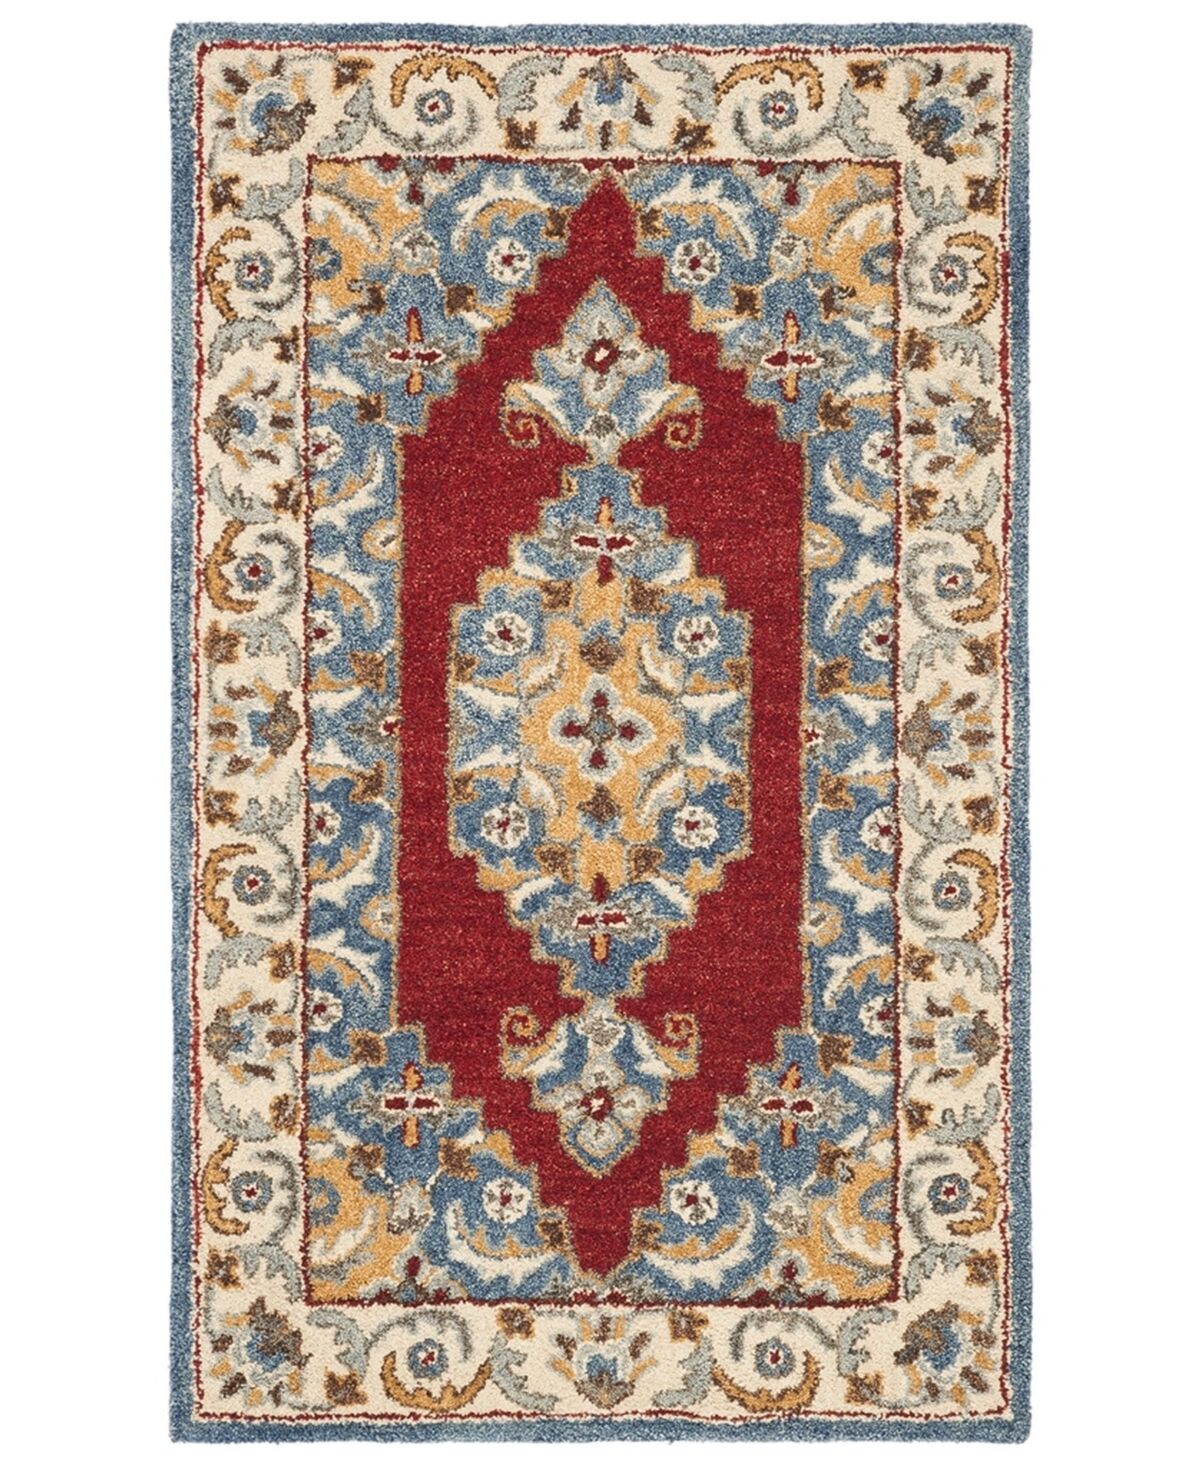 Safavieh Antiquity At505 Blue and Red 4' x 6' Area Rug - Blue